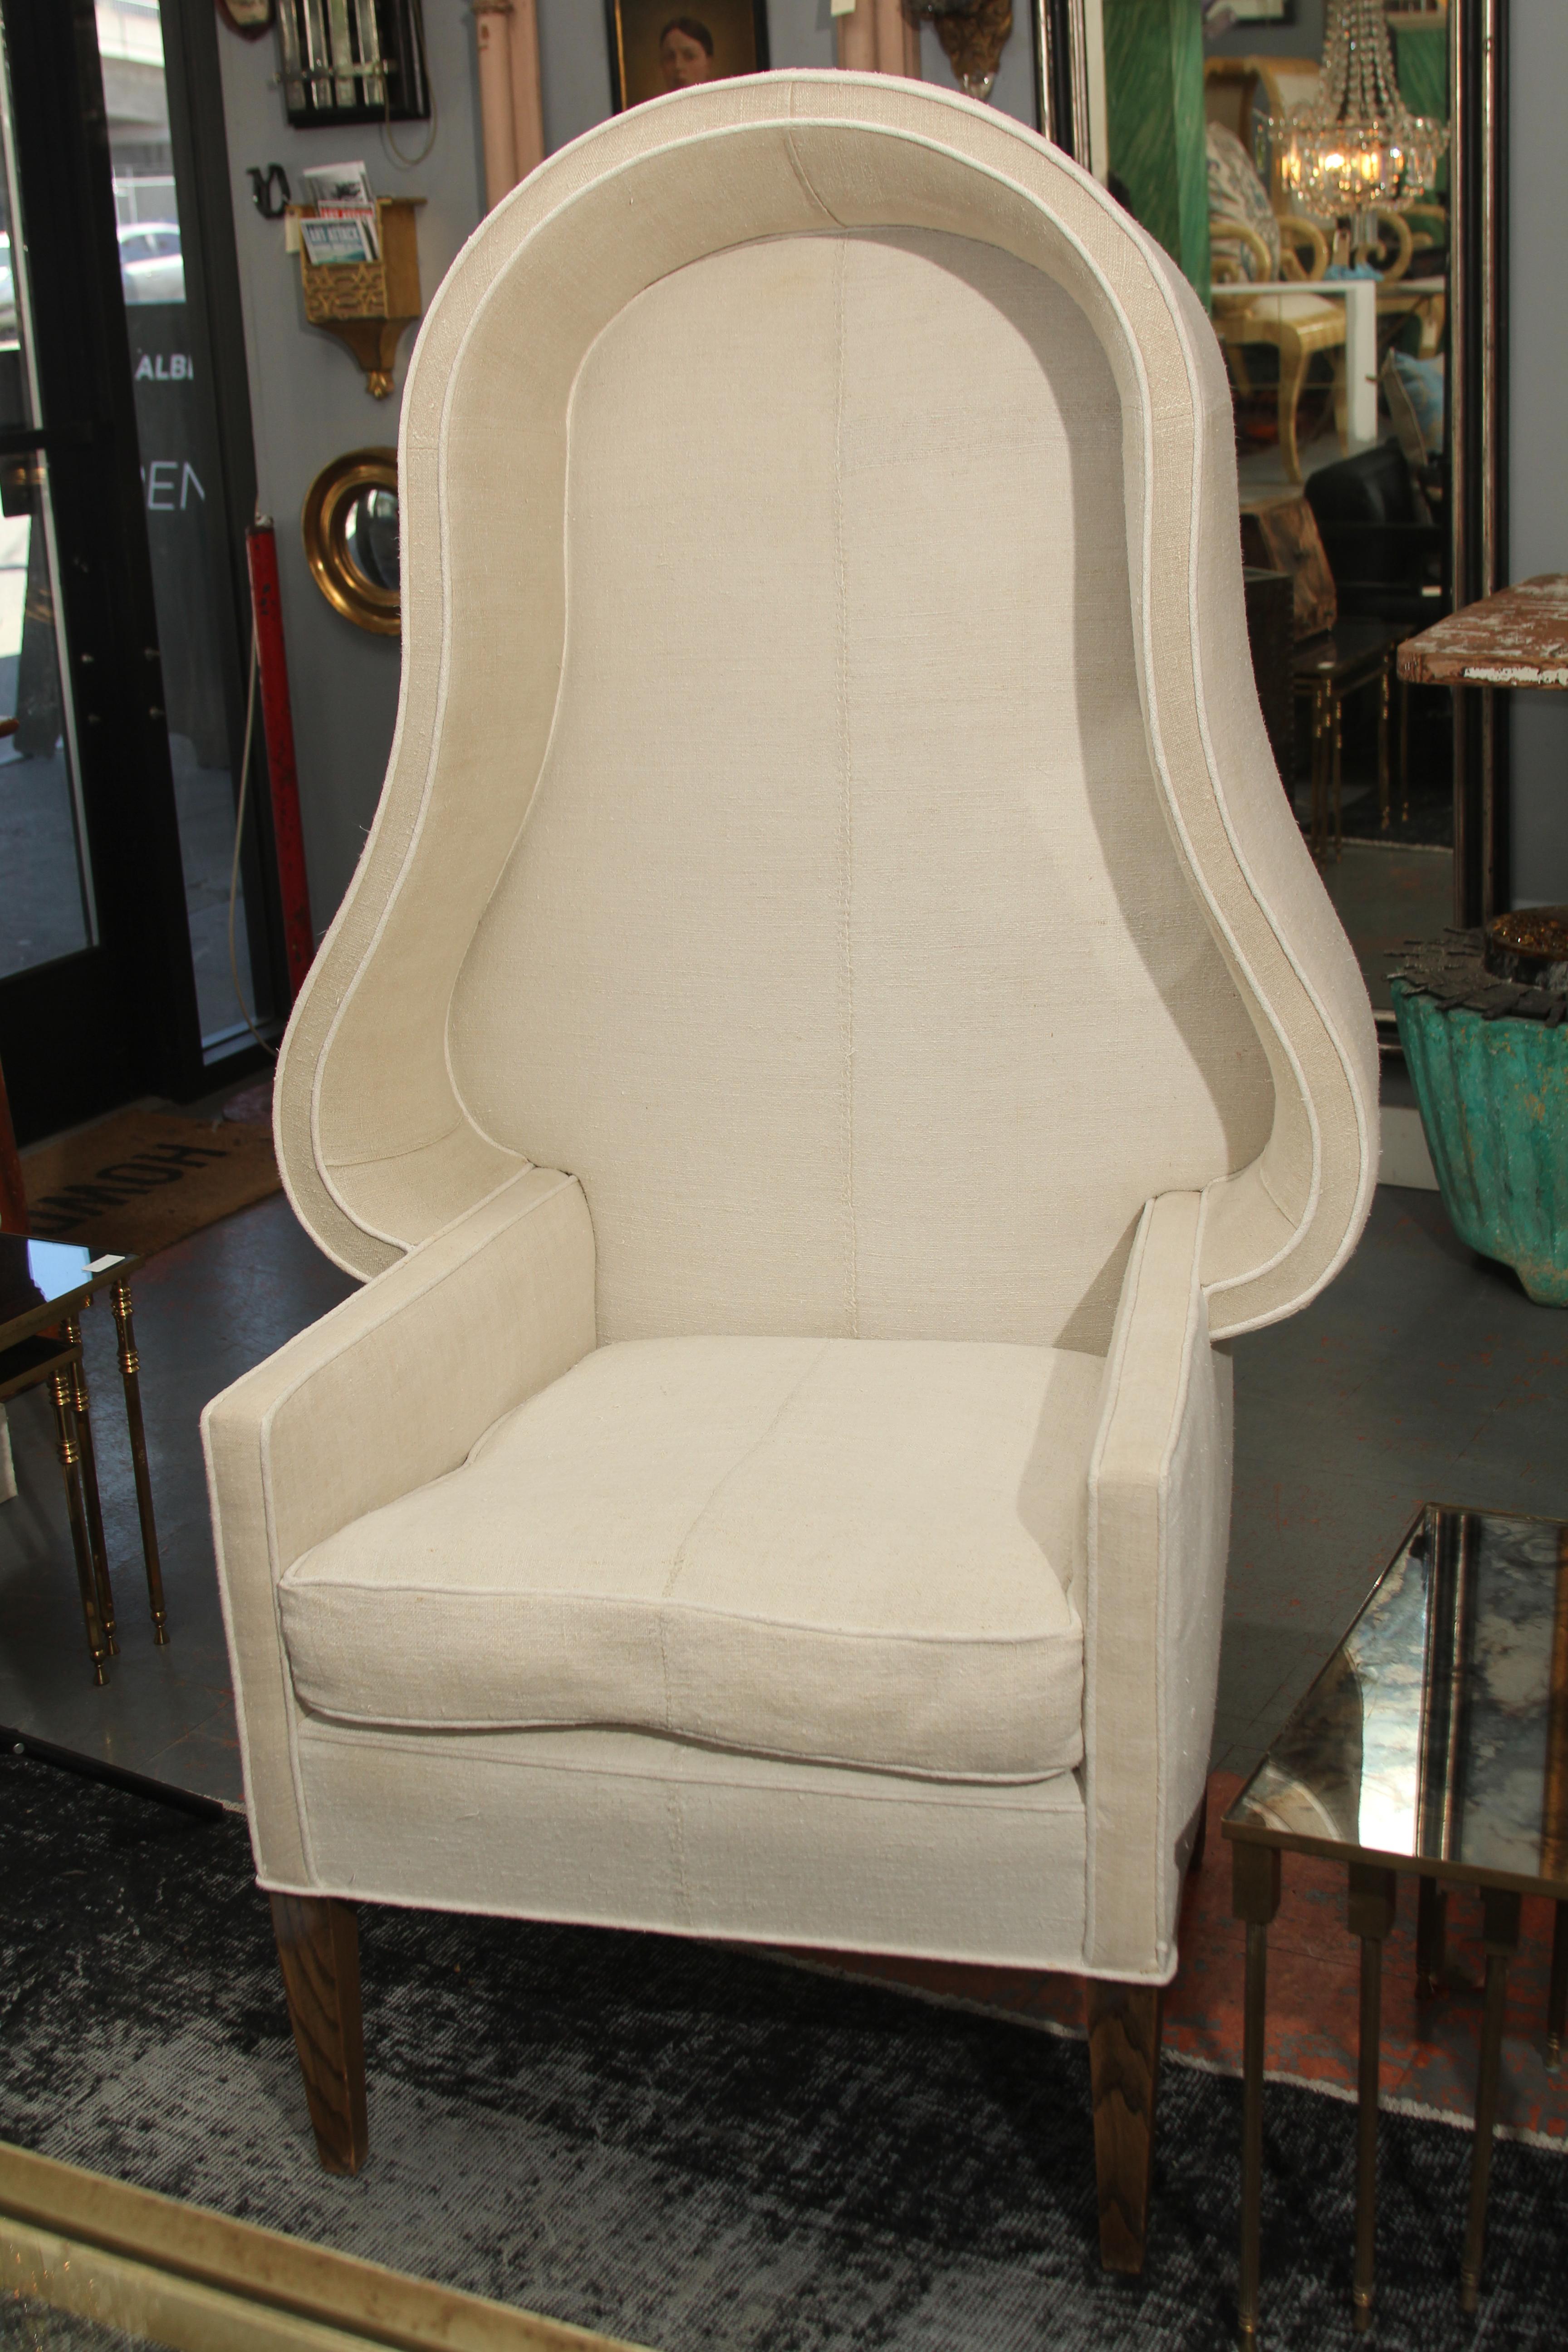 Sleek design and curves on this early 20th century Porters chair make it a piece of sculpture as well as functional seating. Simple, strong modern lines reupholstered in late 19th century homespun linen. Feather cushion.
 